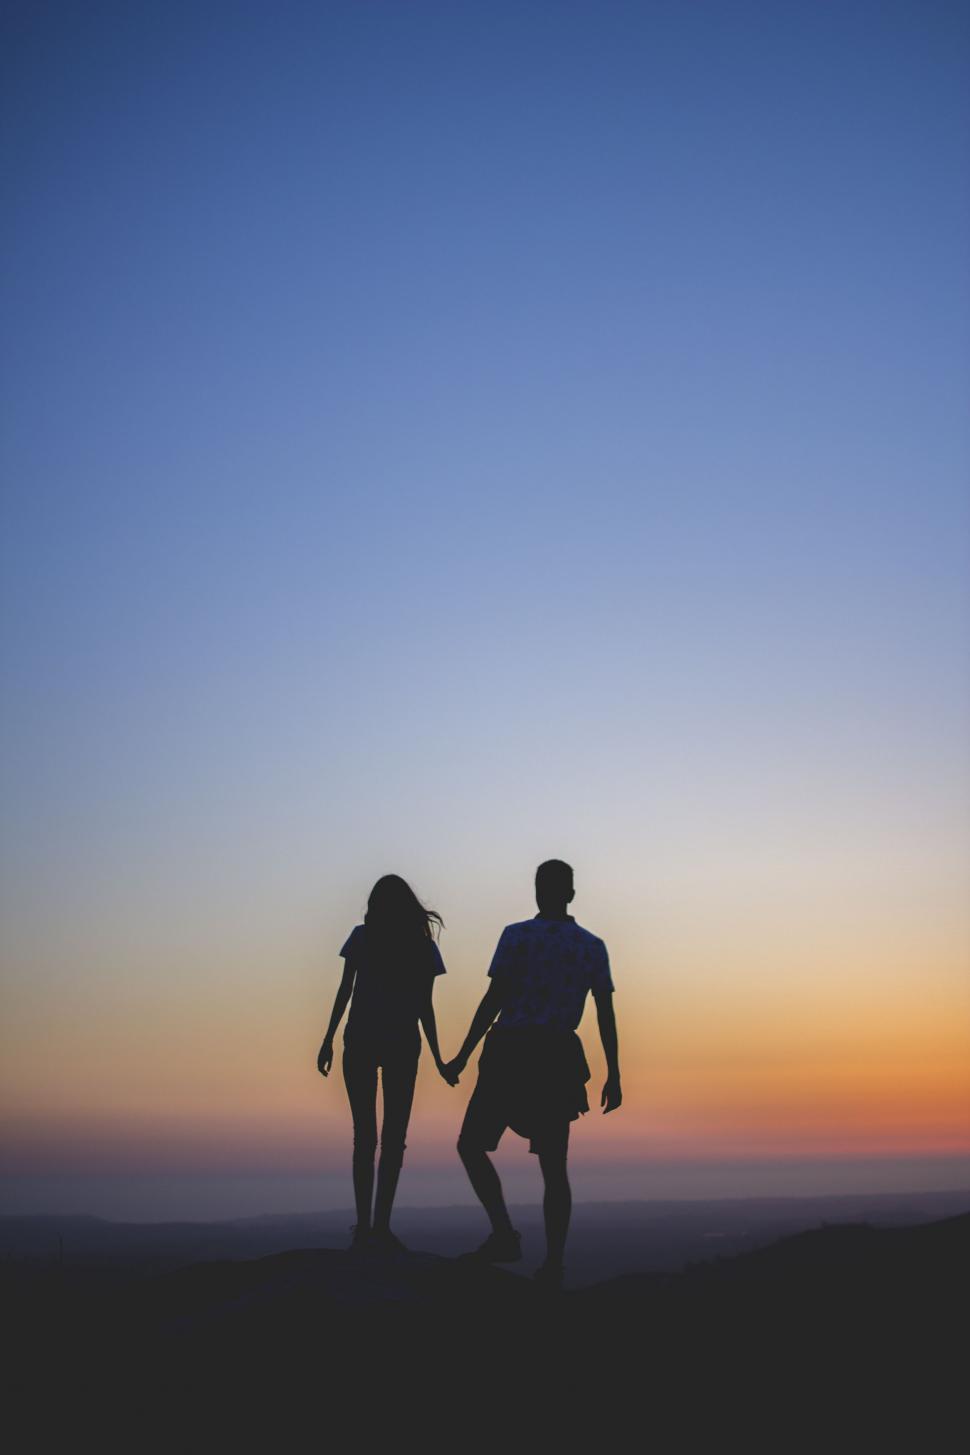 Free Image of A Man and a Woman Holding Hands at Sunset 